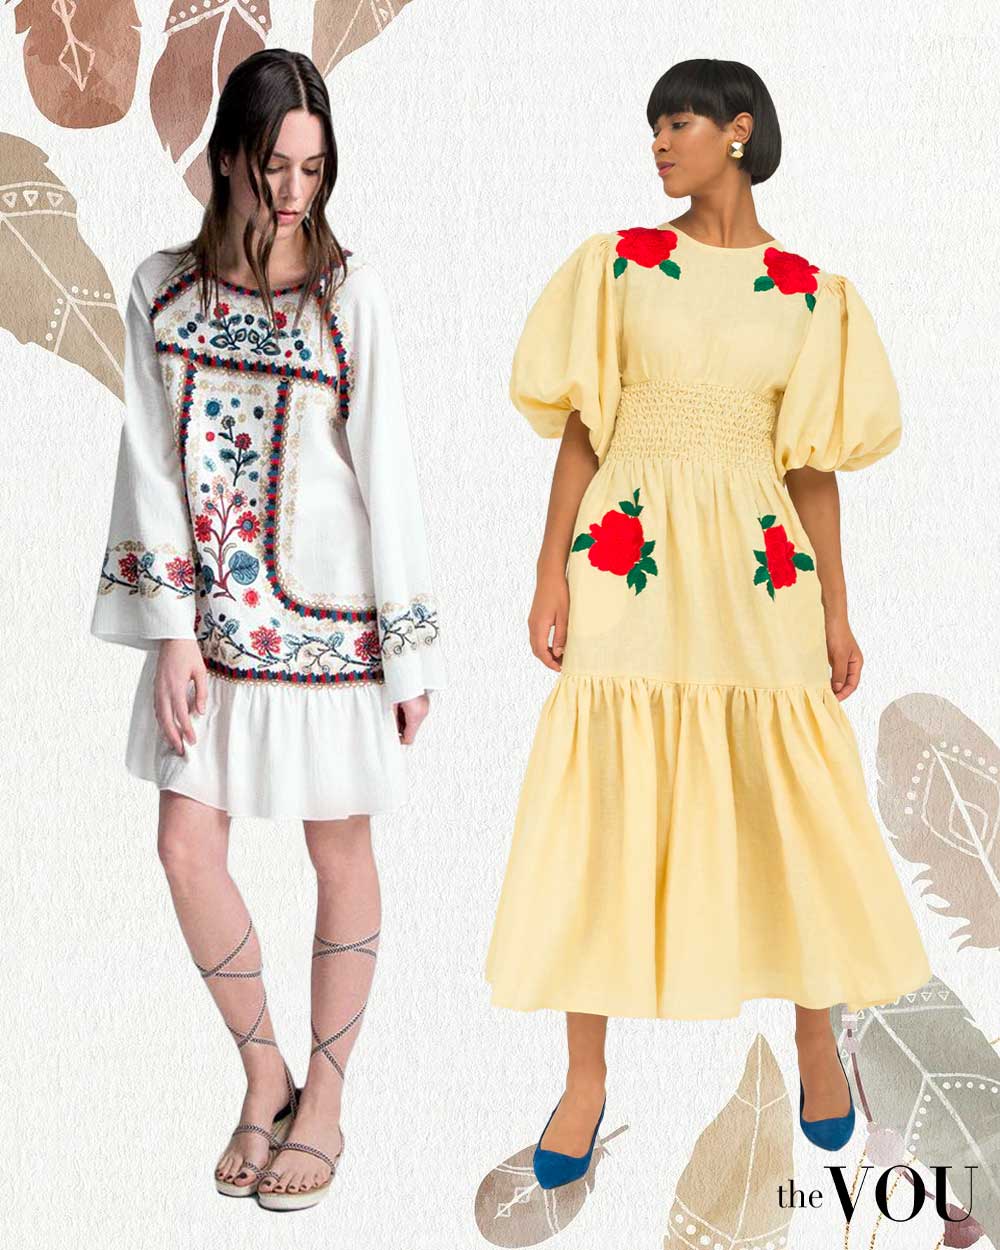 Boho Styles & Clothing With Embroidered Accents